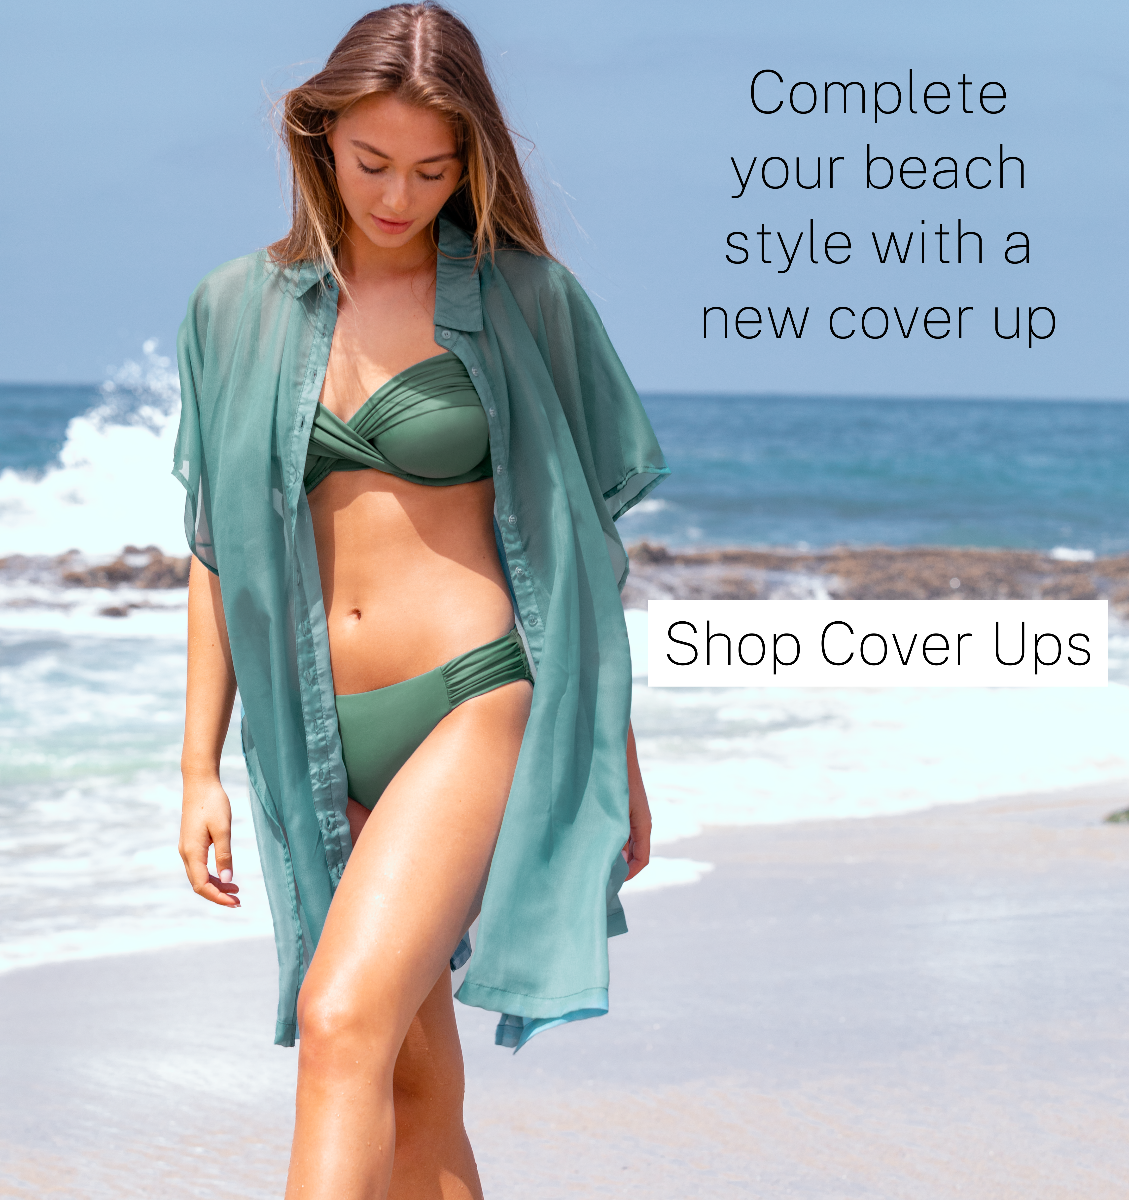 Sea Quest Fashions Home page - Swimwear & Clothing Boutique